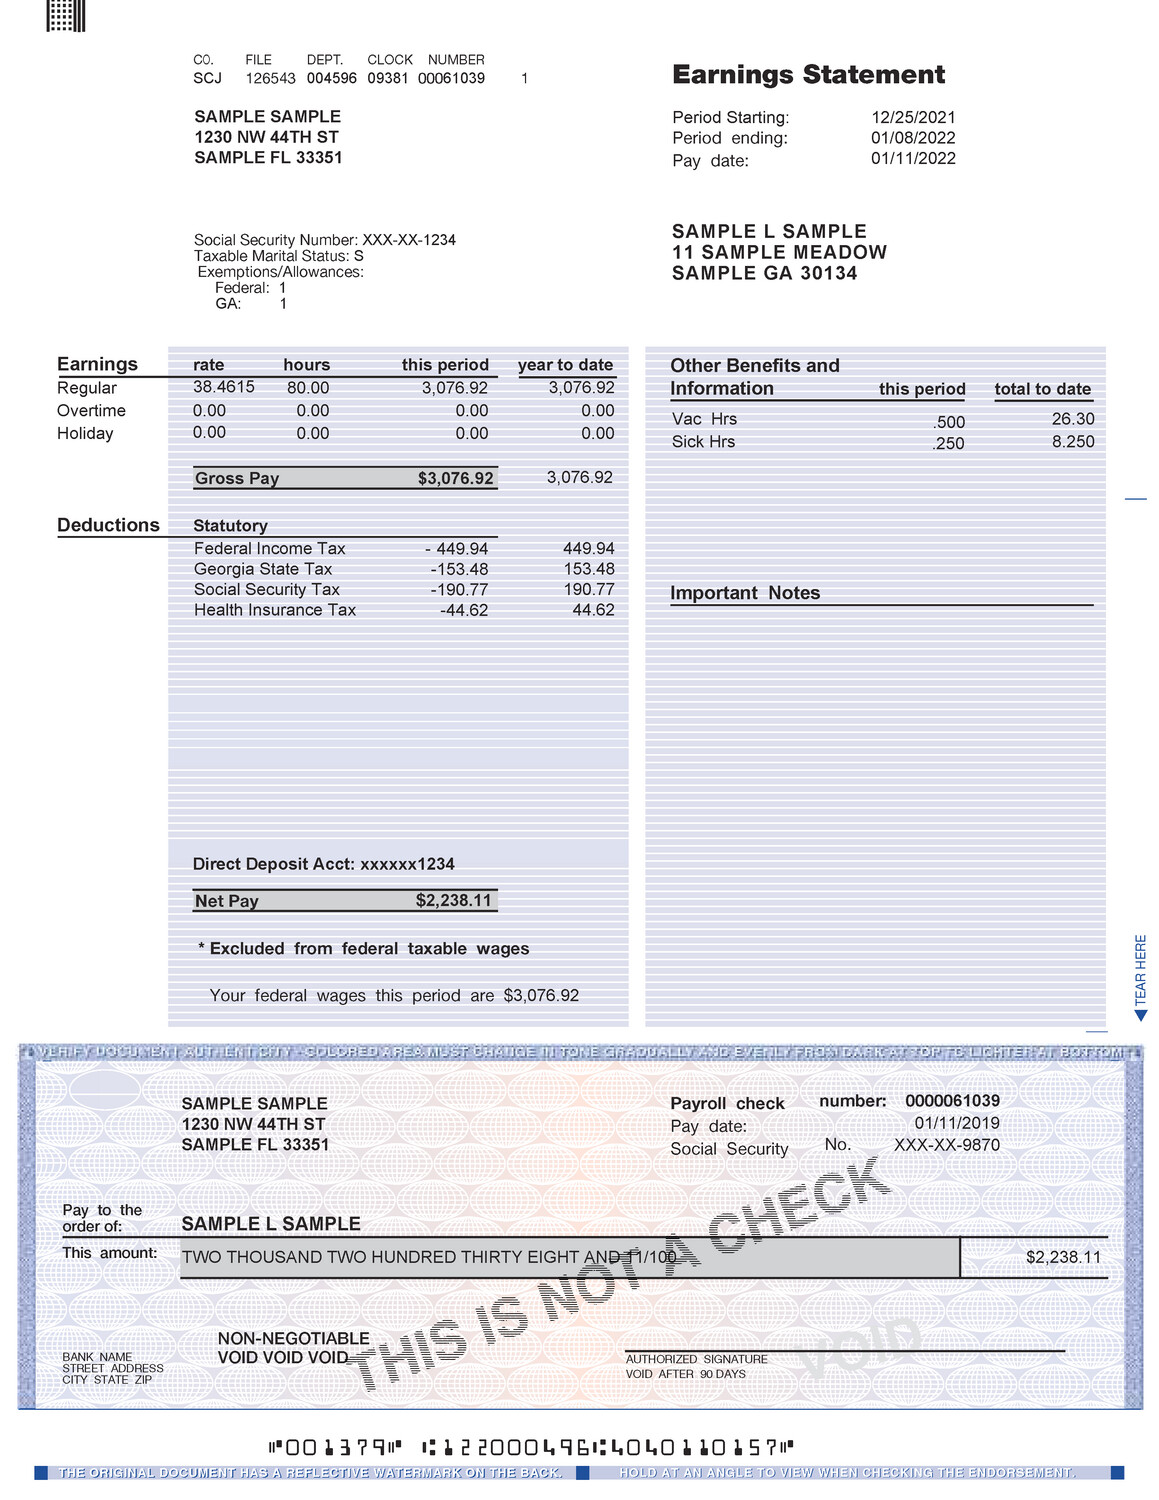 Pay stub Editable Template - NON ADP Full Color